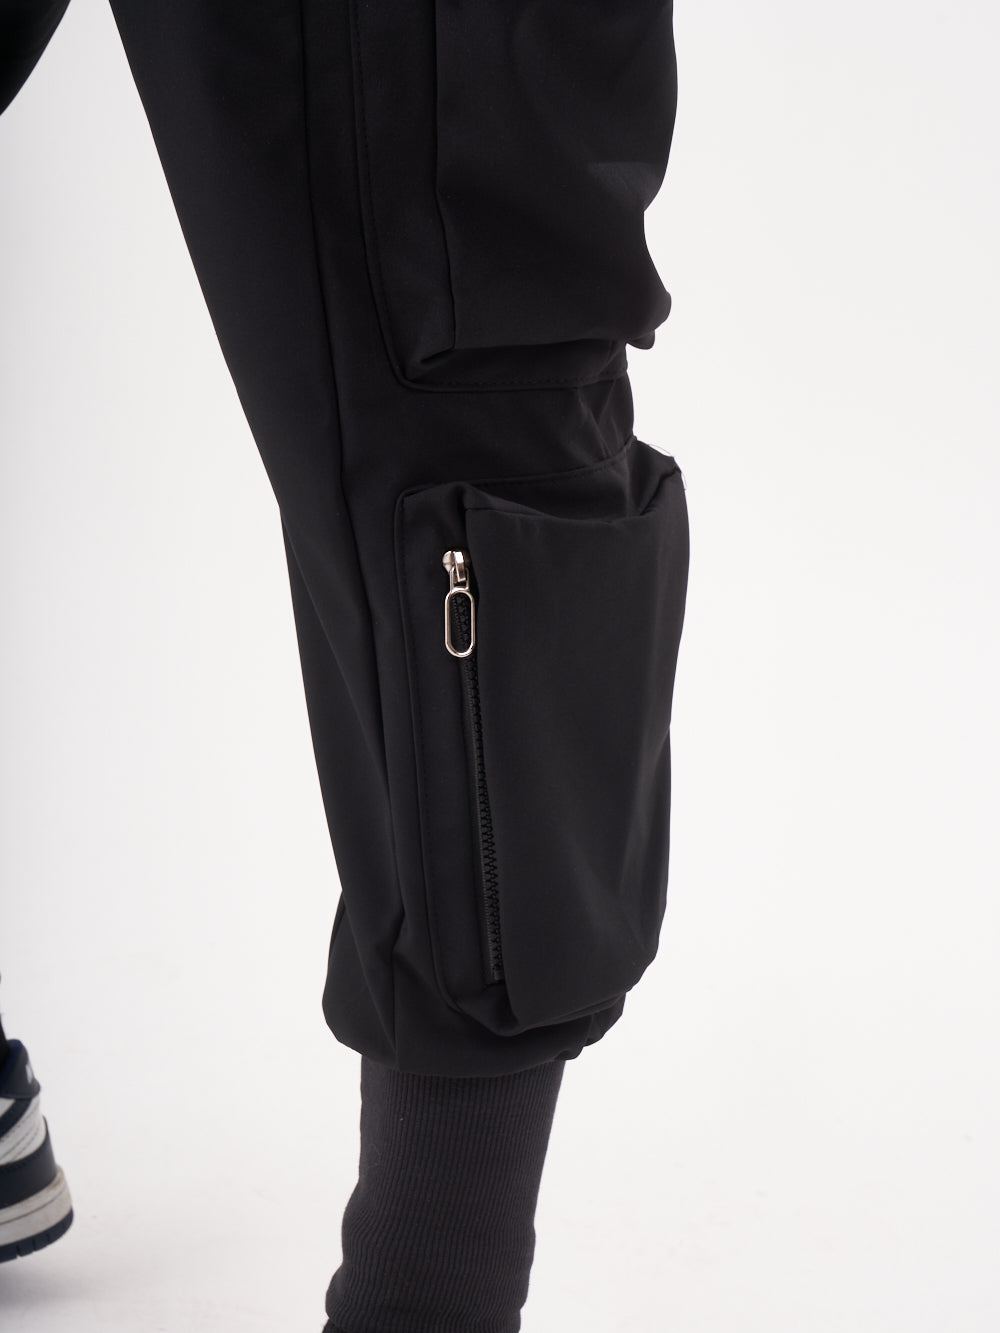 The back of a man wearing OUTLIER JOGGERS | BLACK cargo pants.